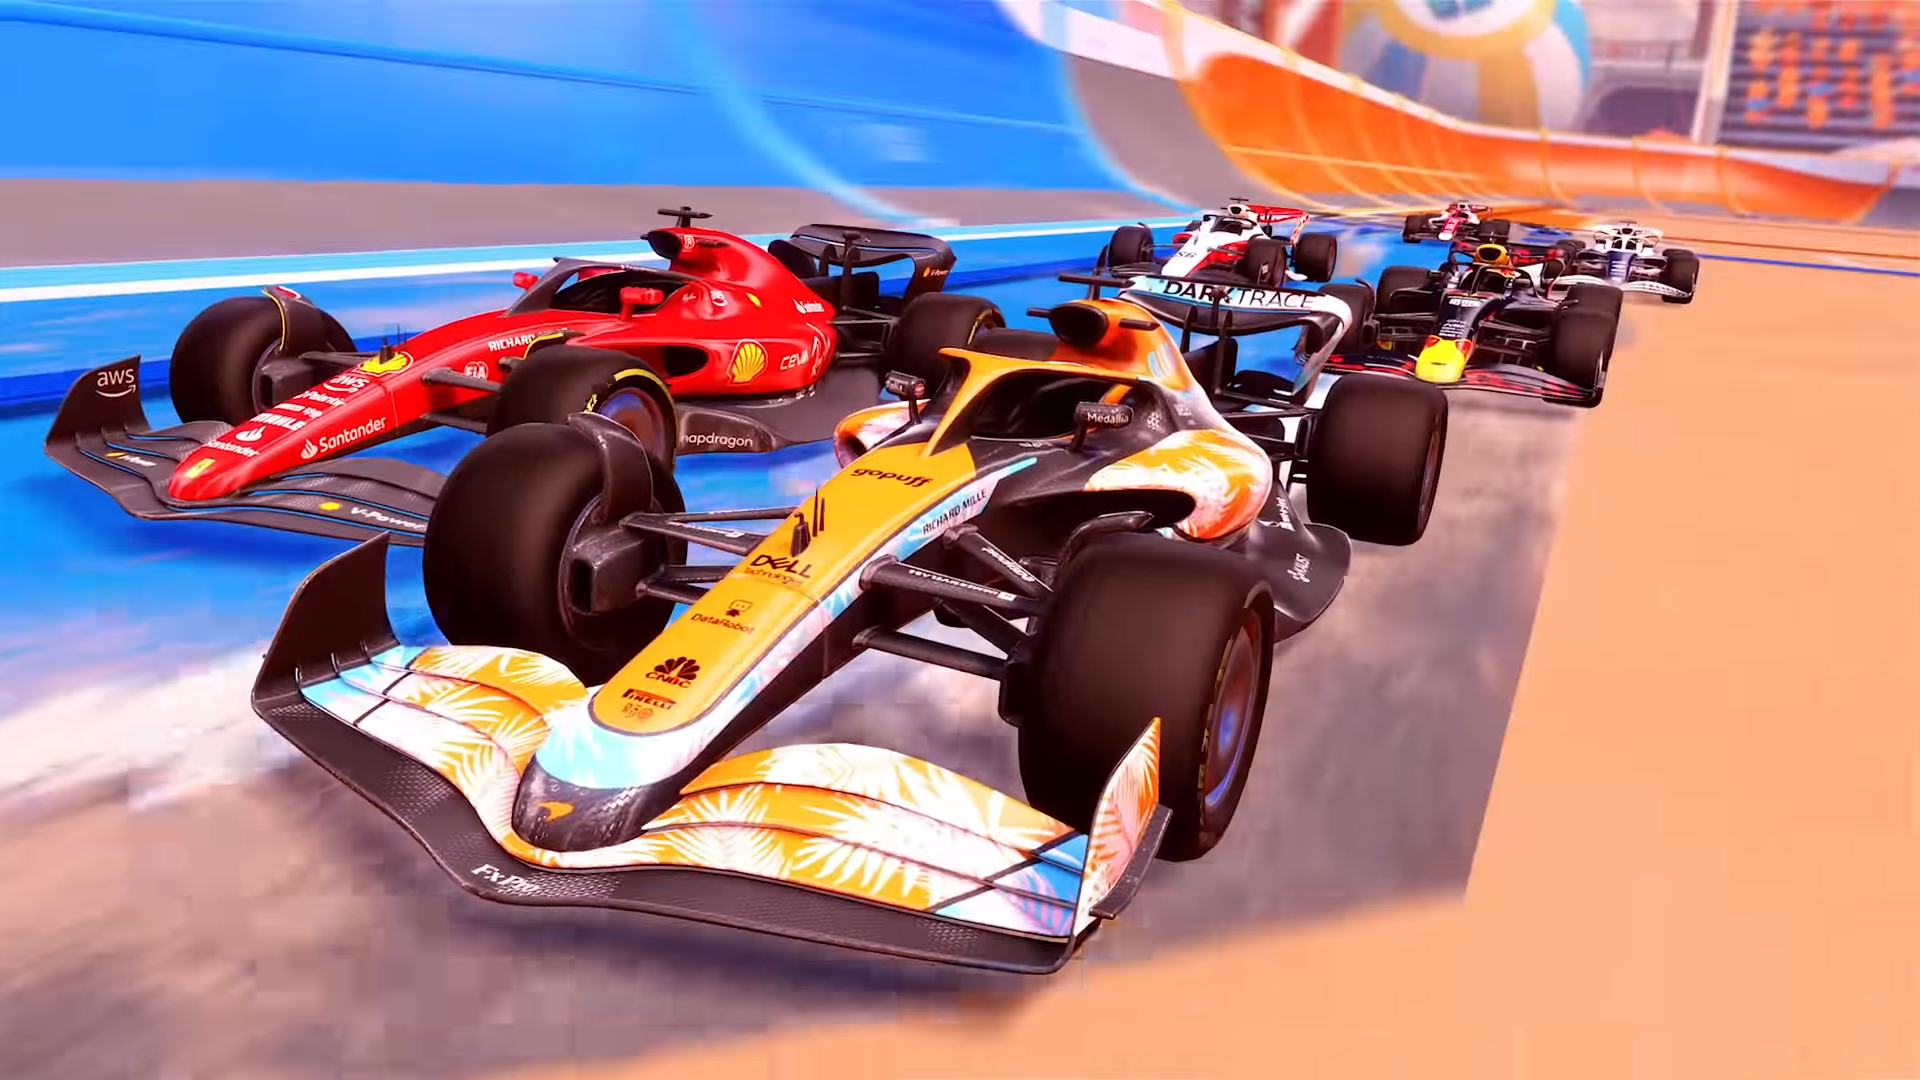 Rocket League's F1 fan pack with 10 car decals available May 20 - Polygon